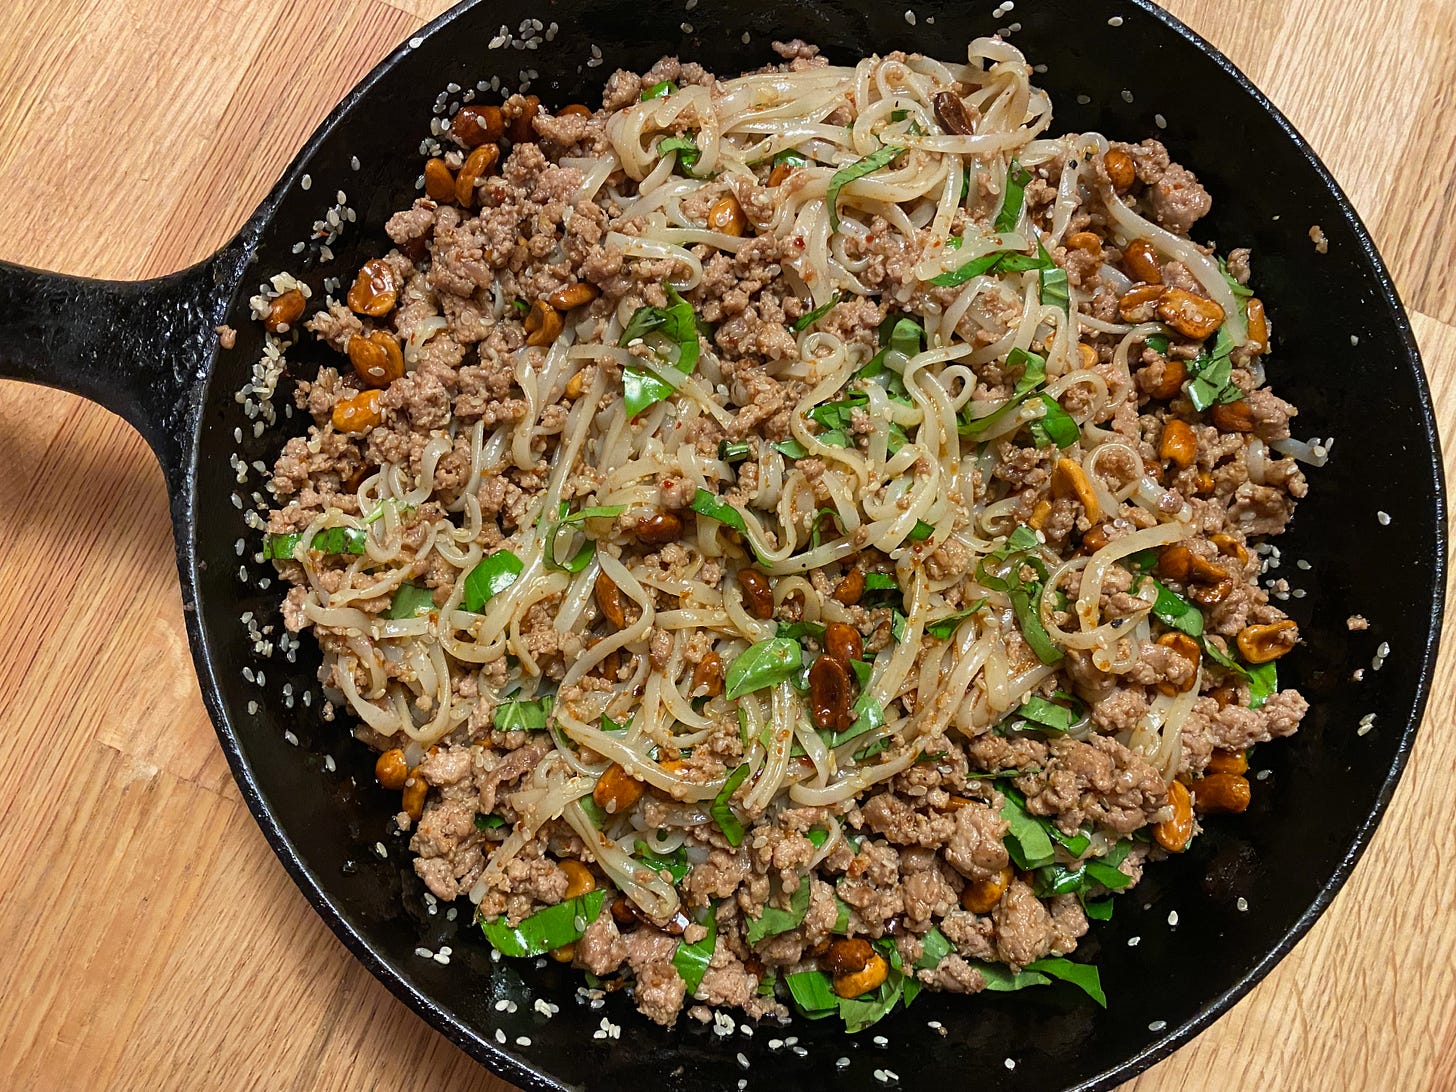 A cast iron frying pan of rice noodles scattered with ground pork, peanuts, and chopped basil.